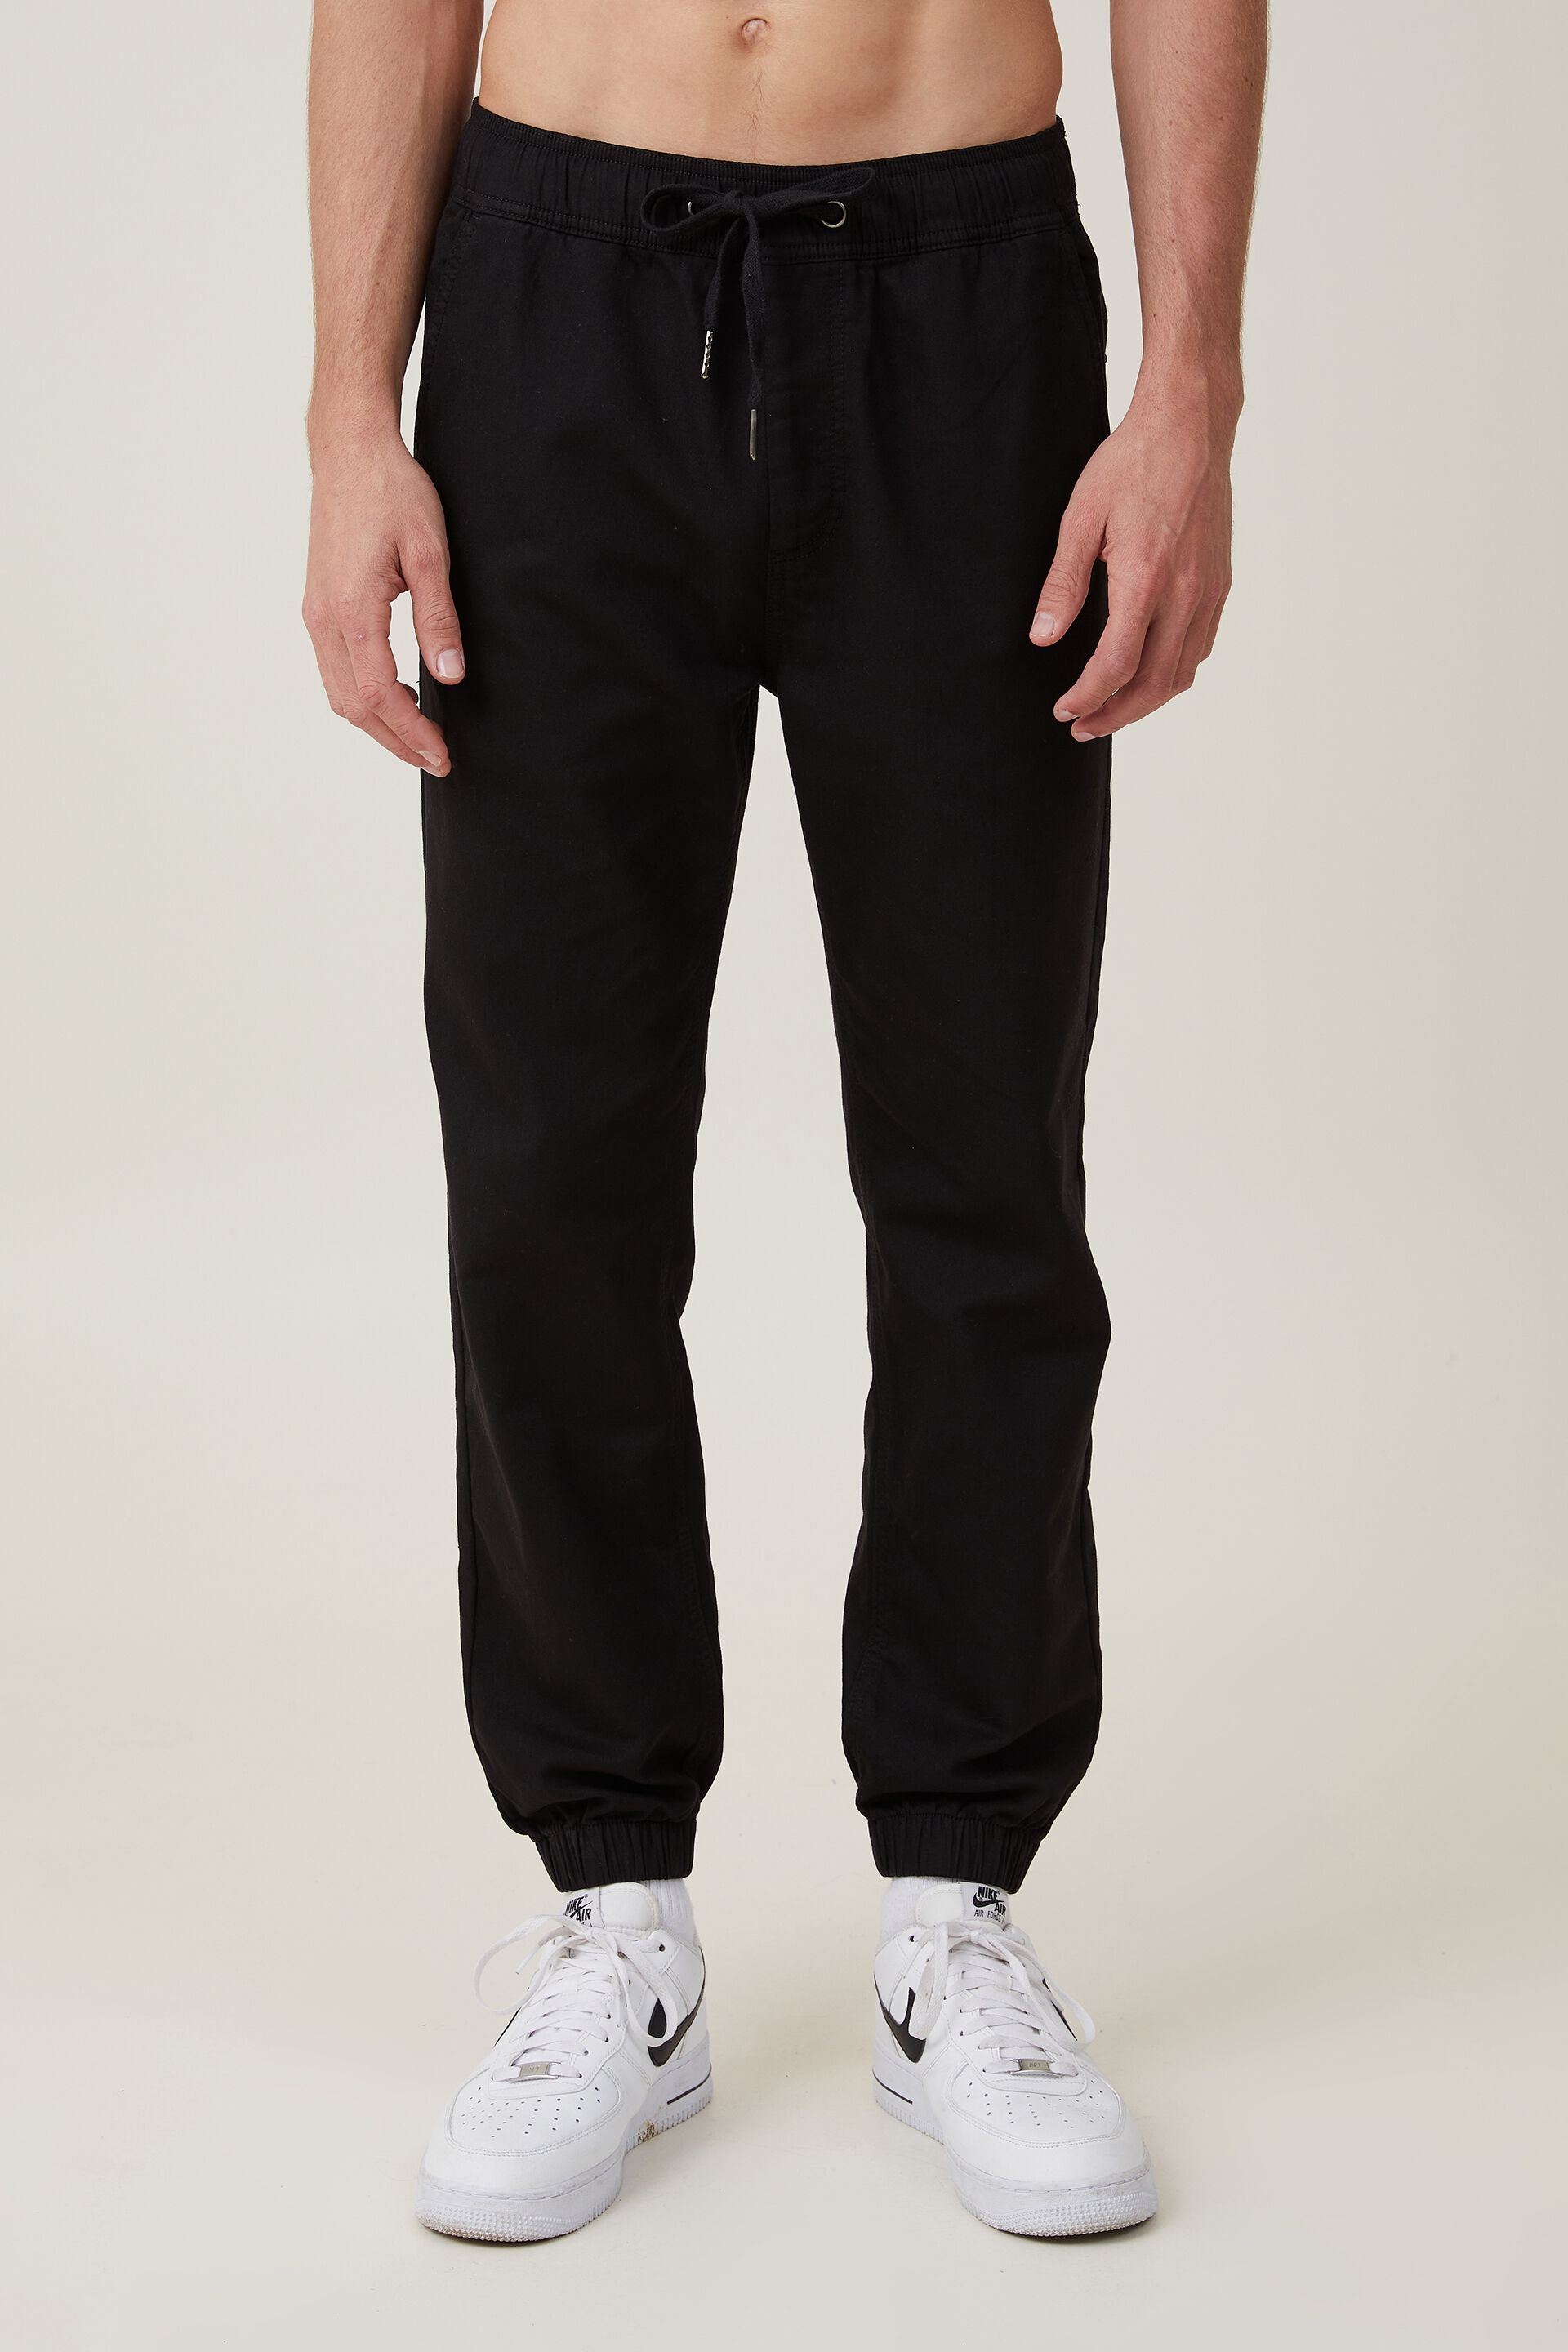 Uniqlo Men Easy Relaxed Jogger Pants, Men's Fashion, Bottoms, Joggers on  Carousell